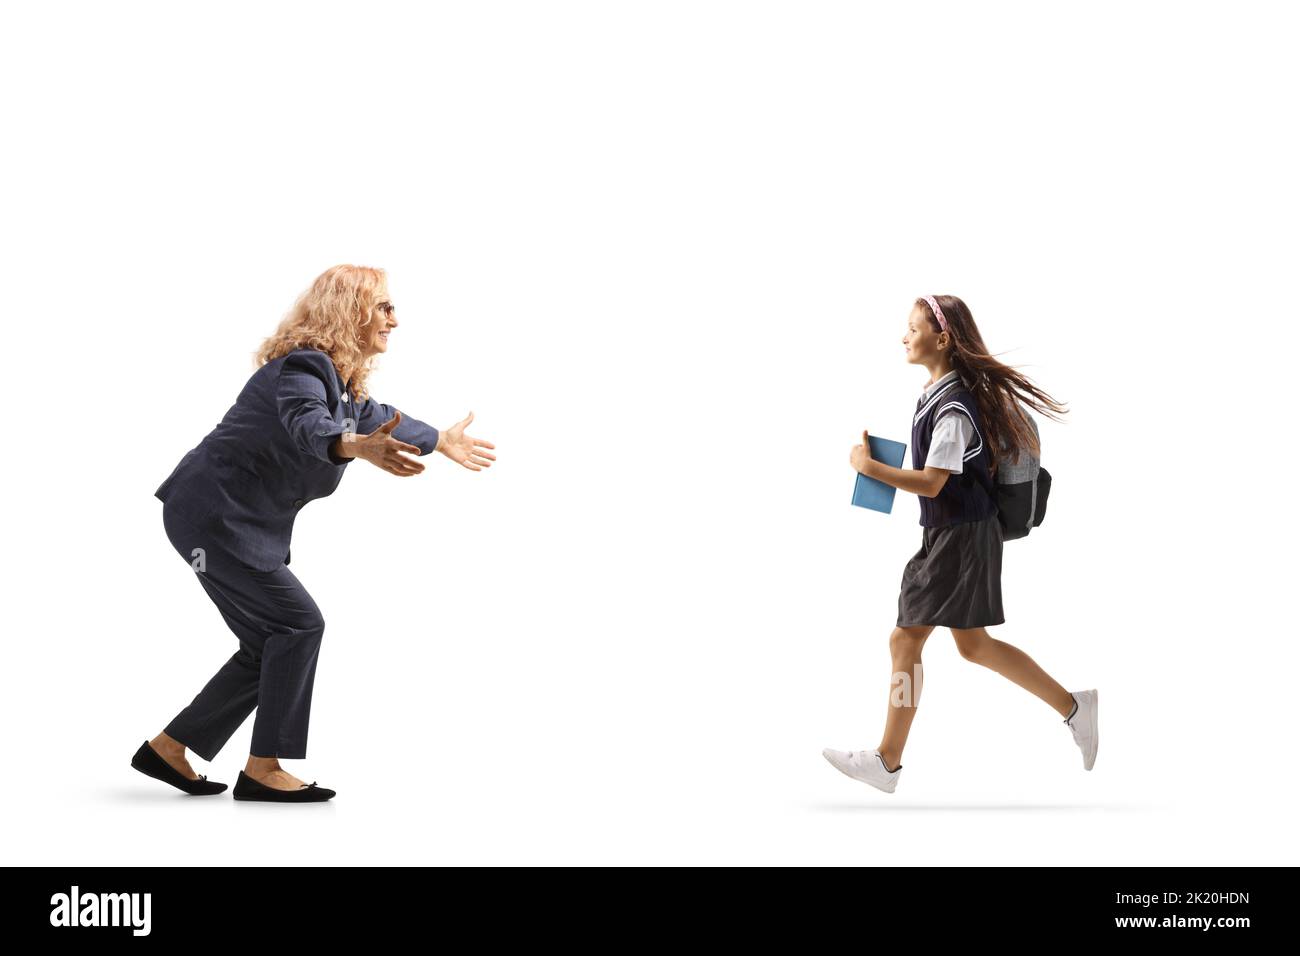 Schoolgirl holding a book and running to hug a woman isolated on white background Stock Photo